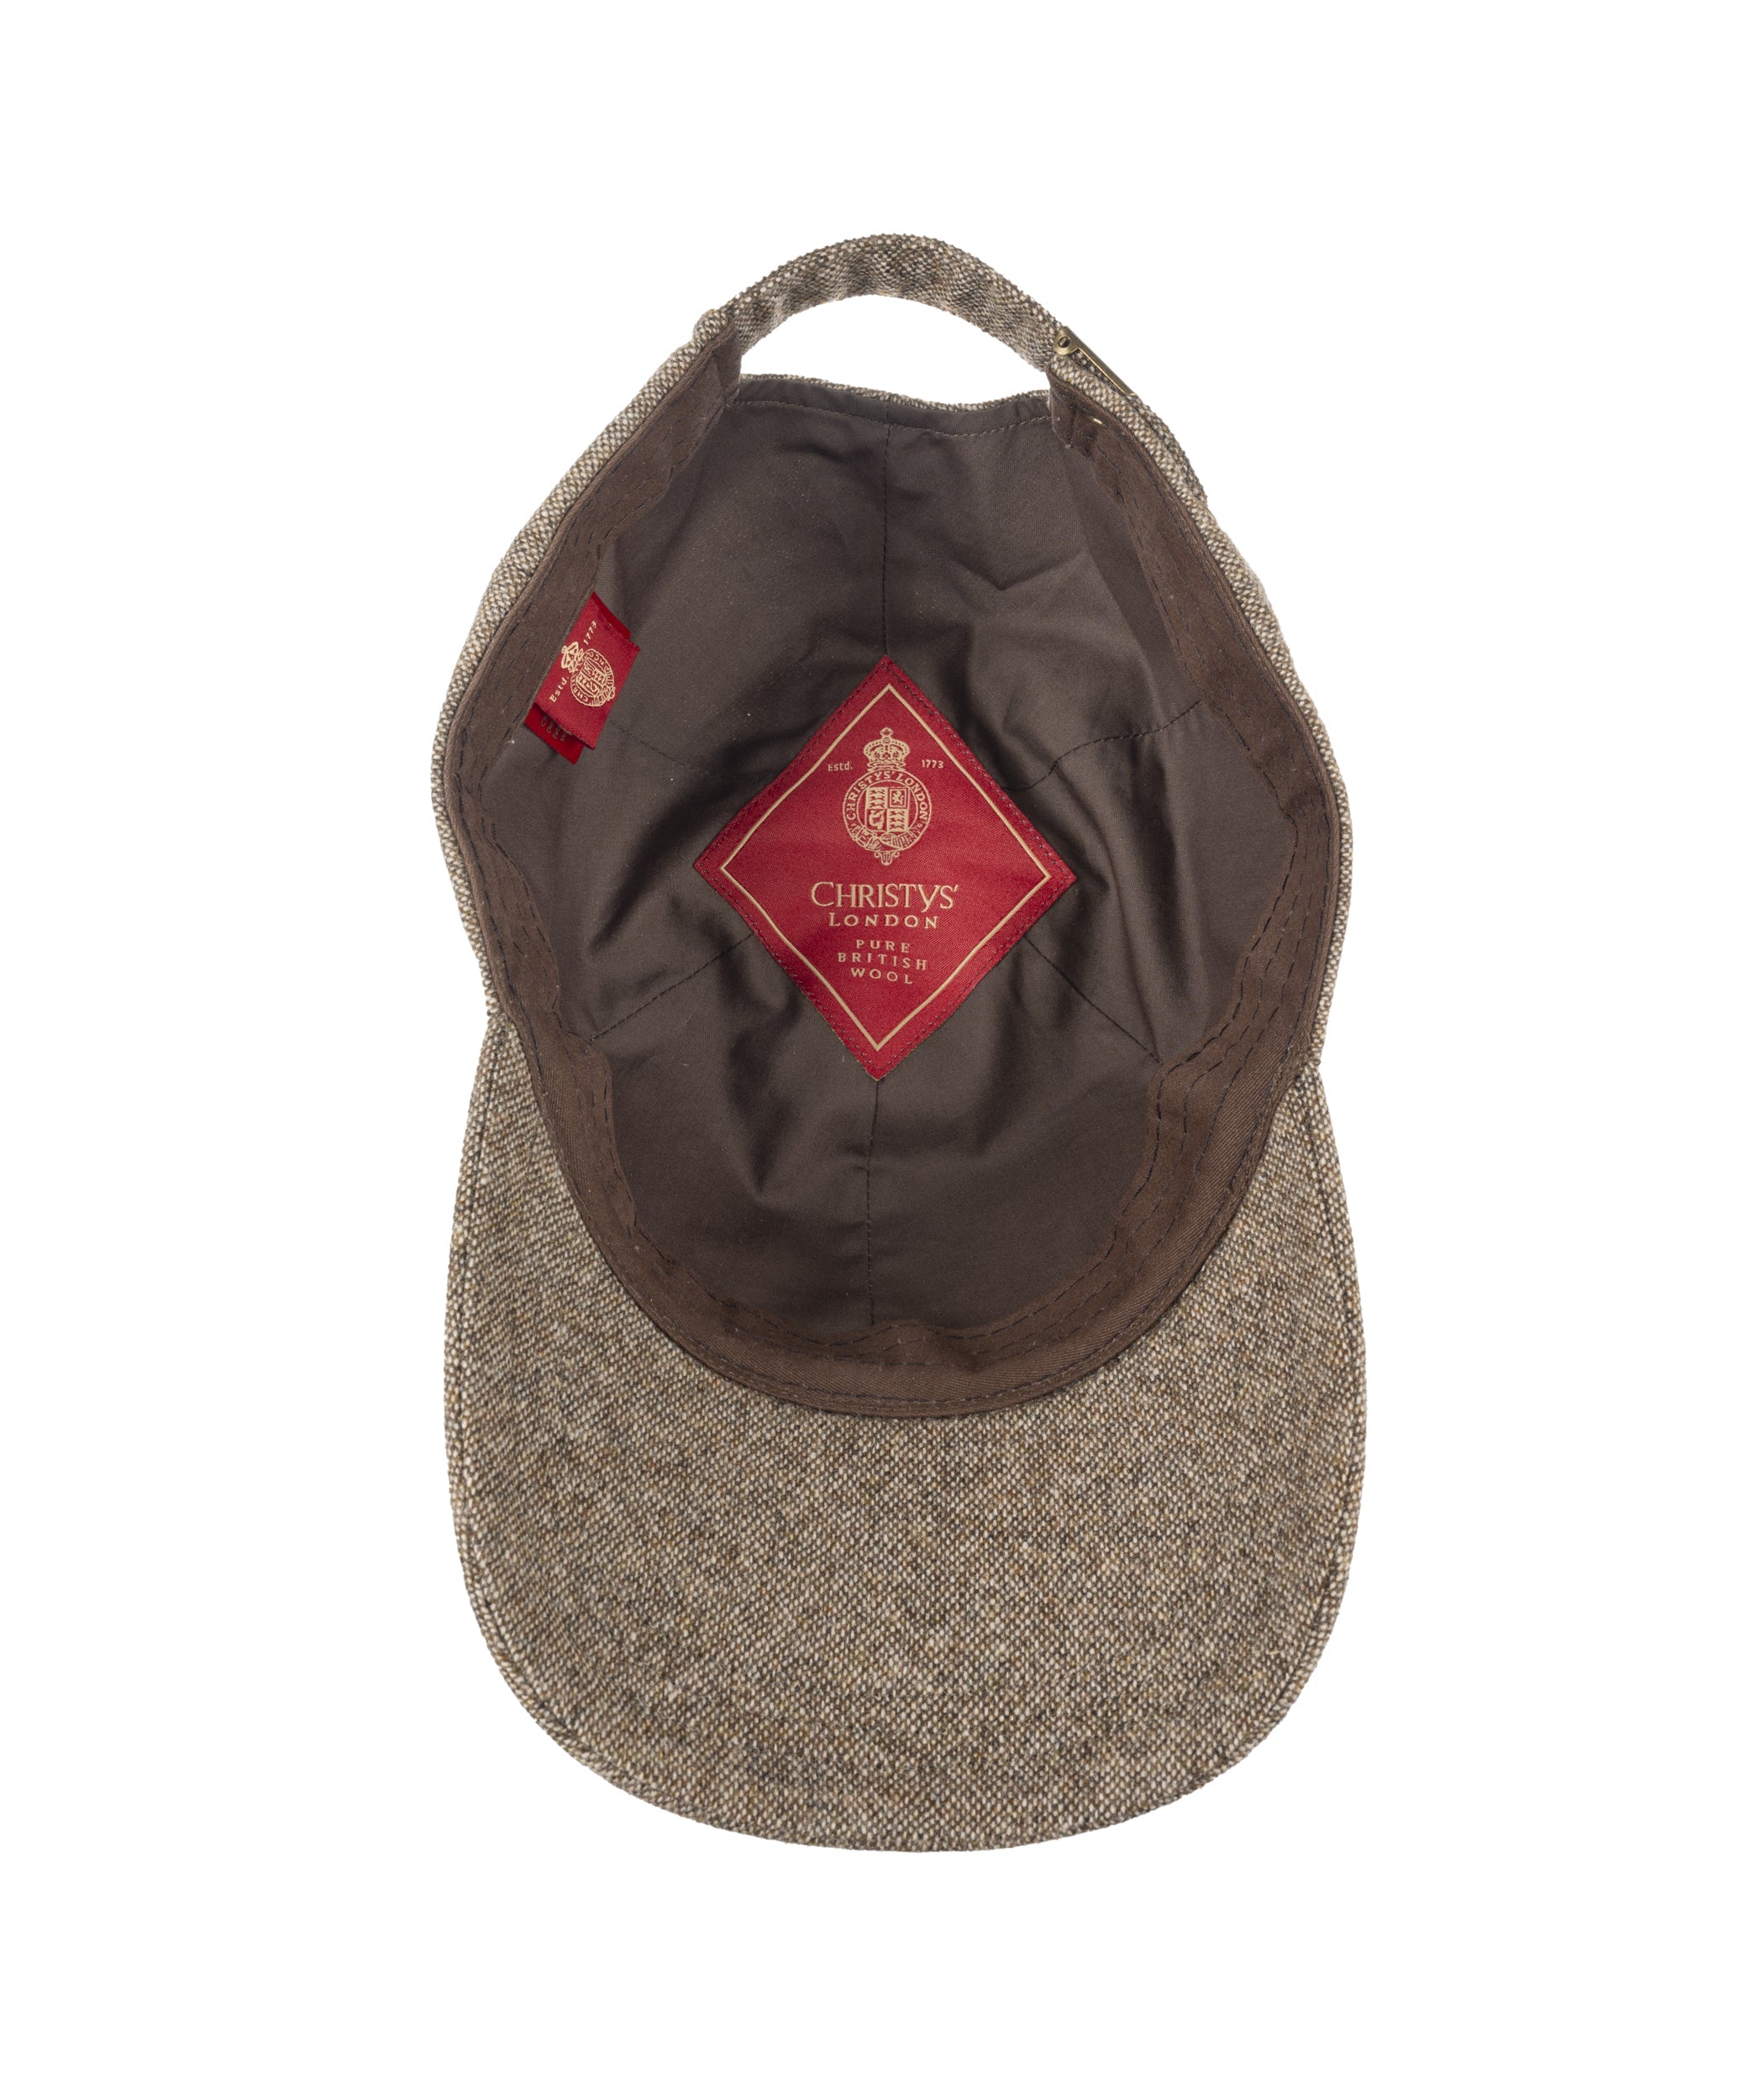 Light Brown Baseball Cap tweed fabric with one size adjuster